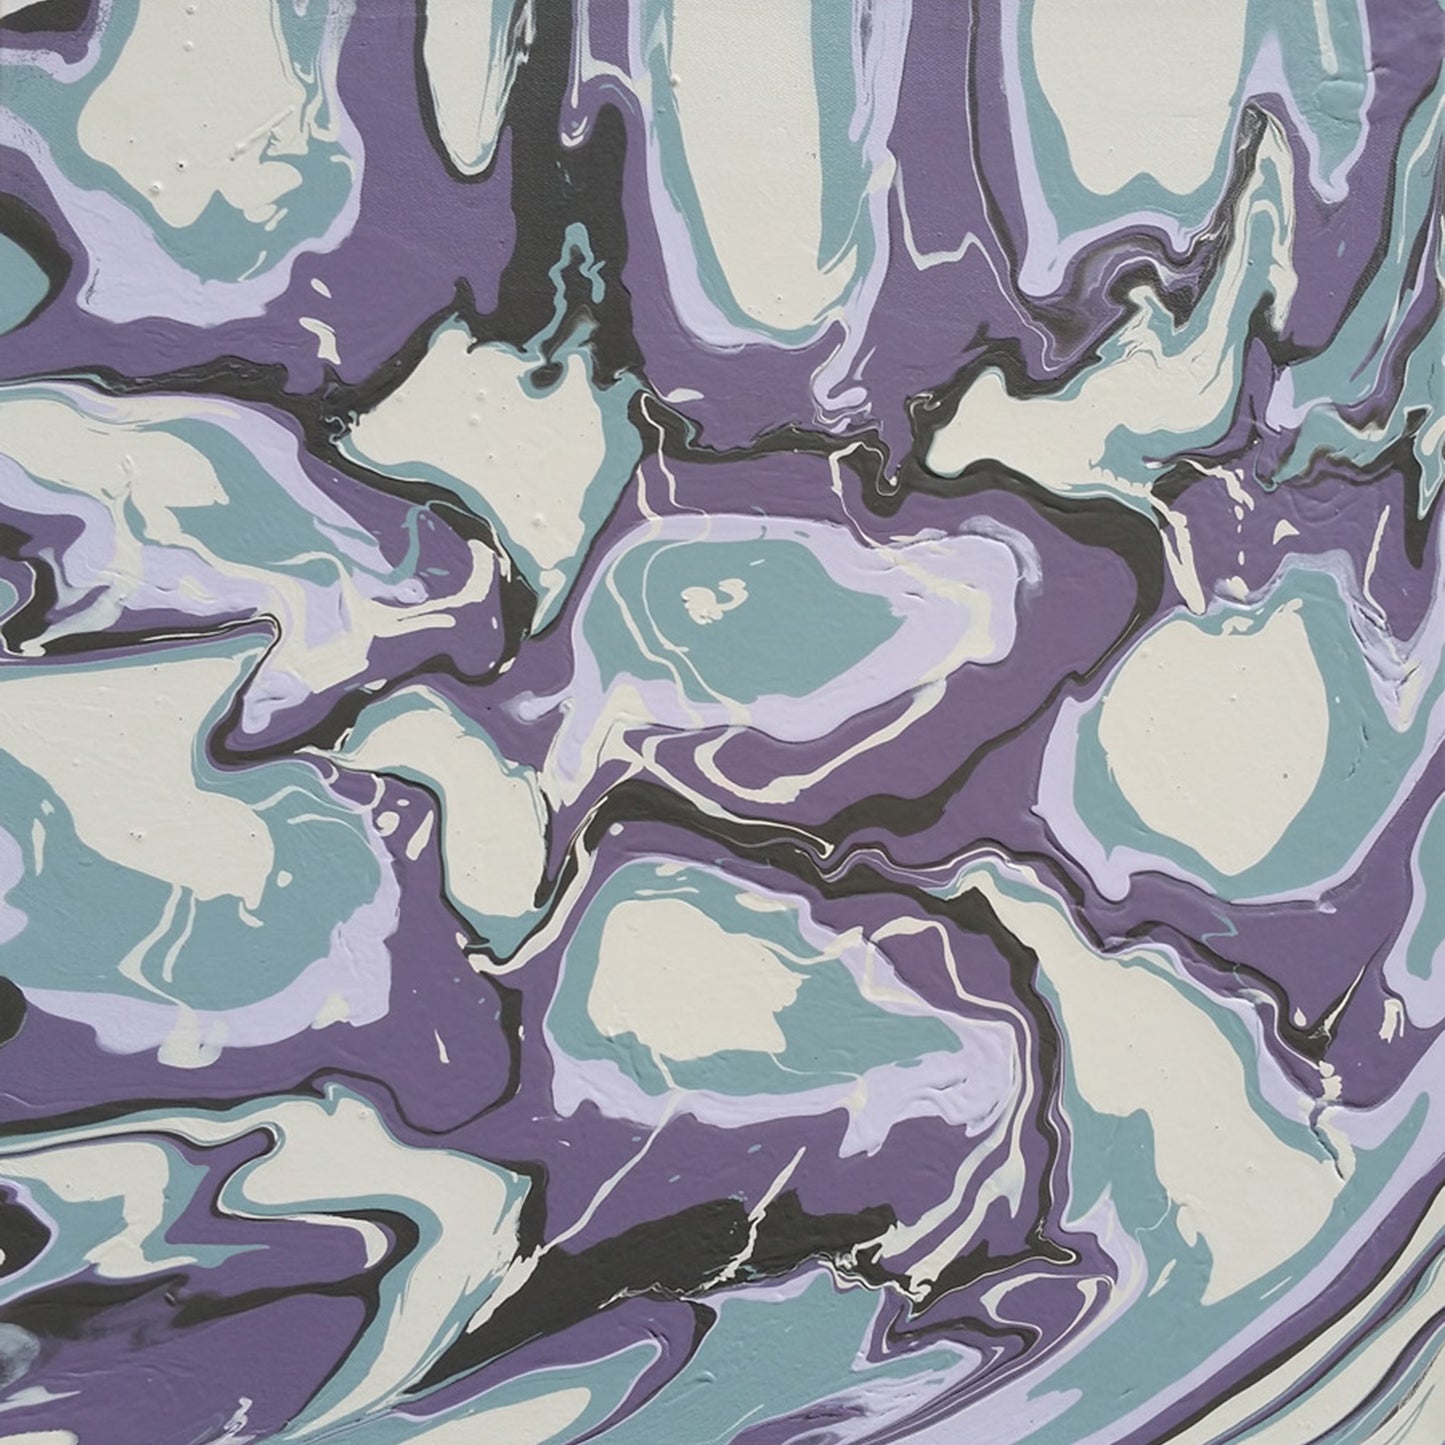 Camouflage-Pattern-Abstract-Expressionism-Art-Fluid-Painting-Purple-White-Grey-Paintings-Toronto-Canada